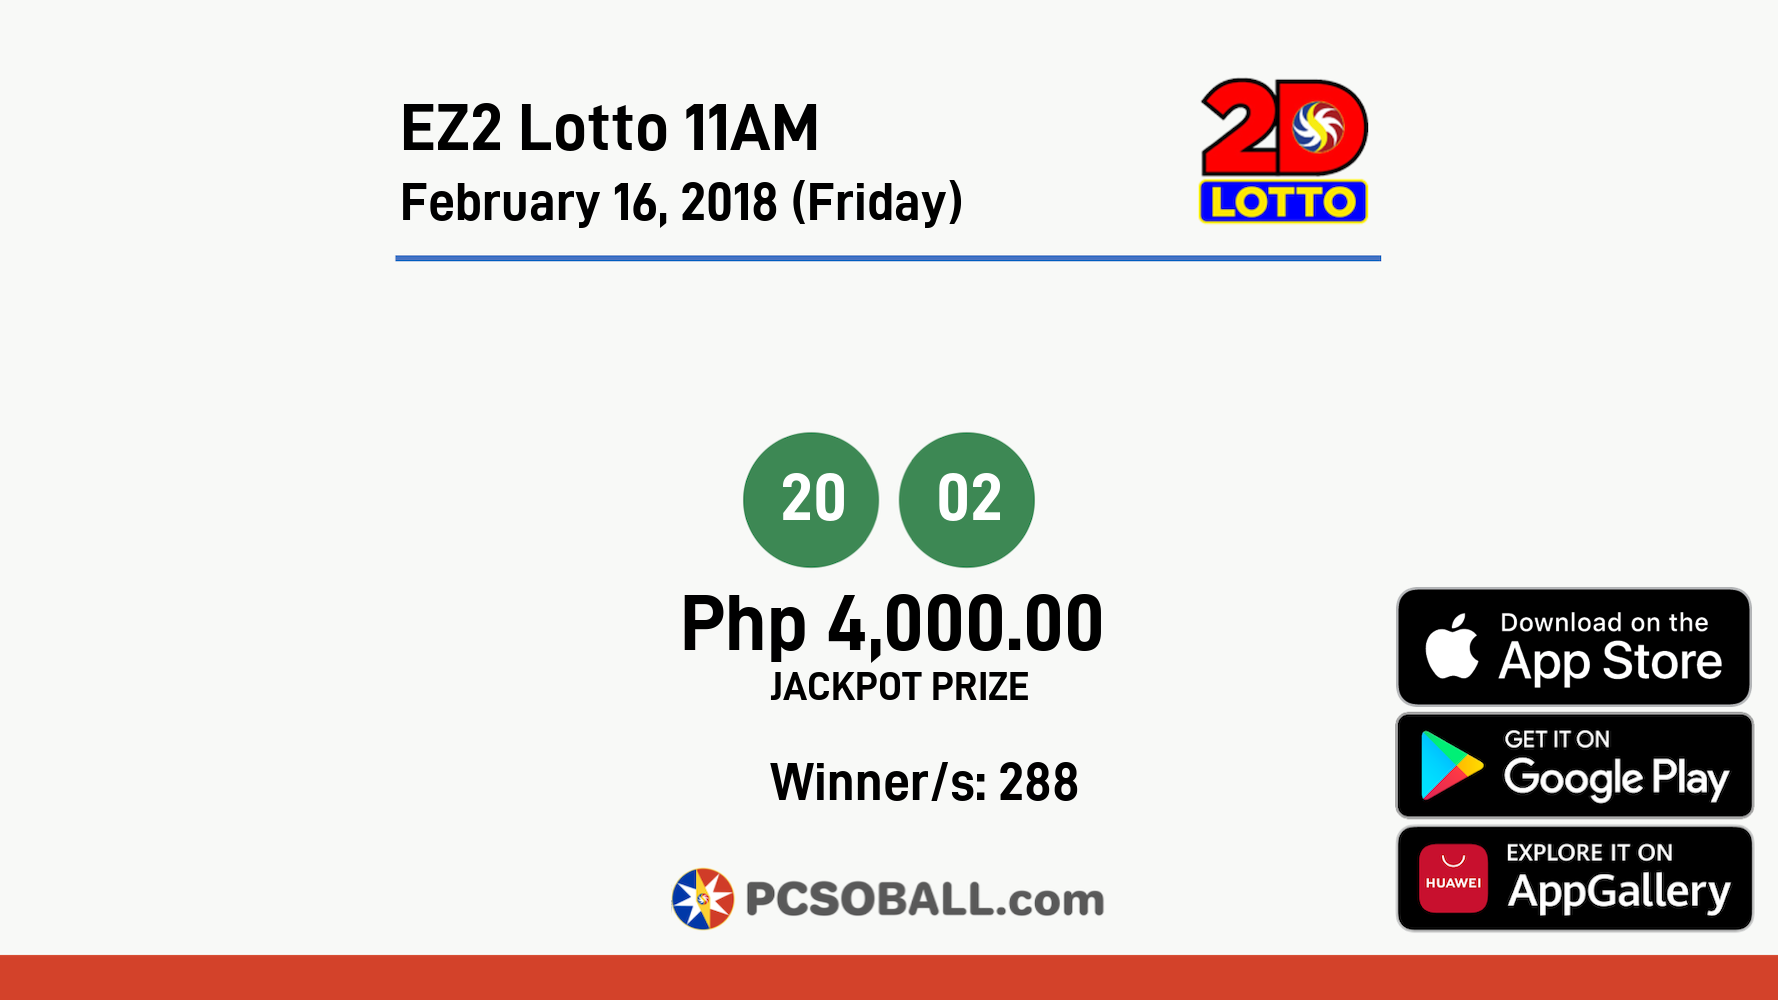 EZ2 Lotto 11AM February 16, 2018 (Friday) Result